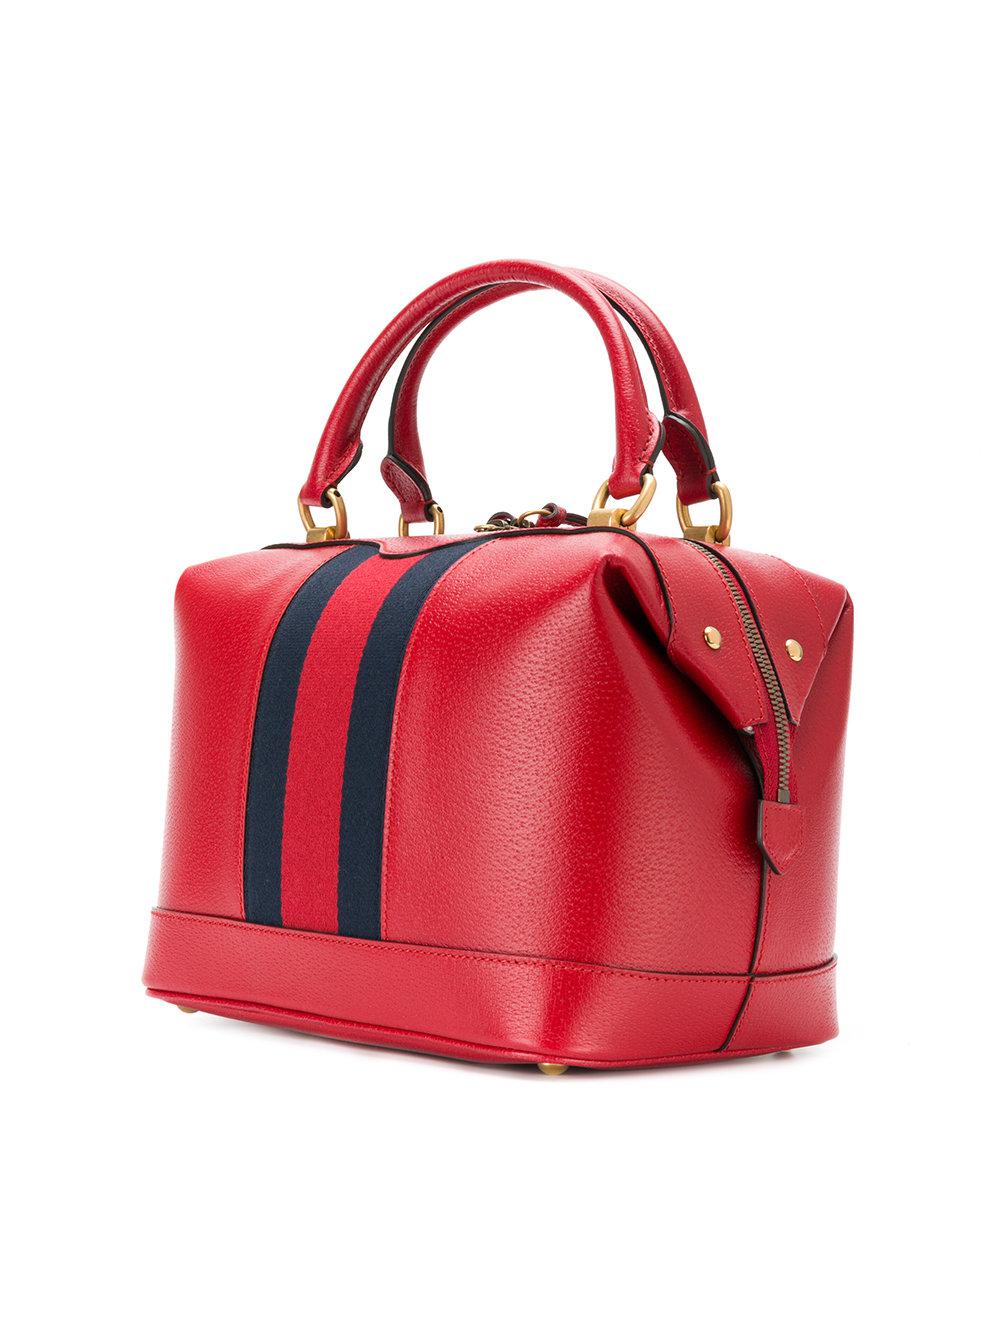 Lyst - Gucci Neo Vintage Doctors Bag in Red